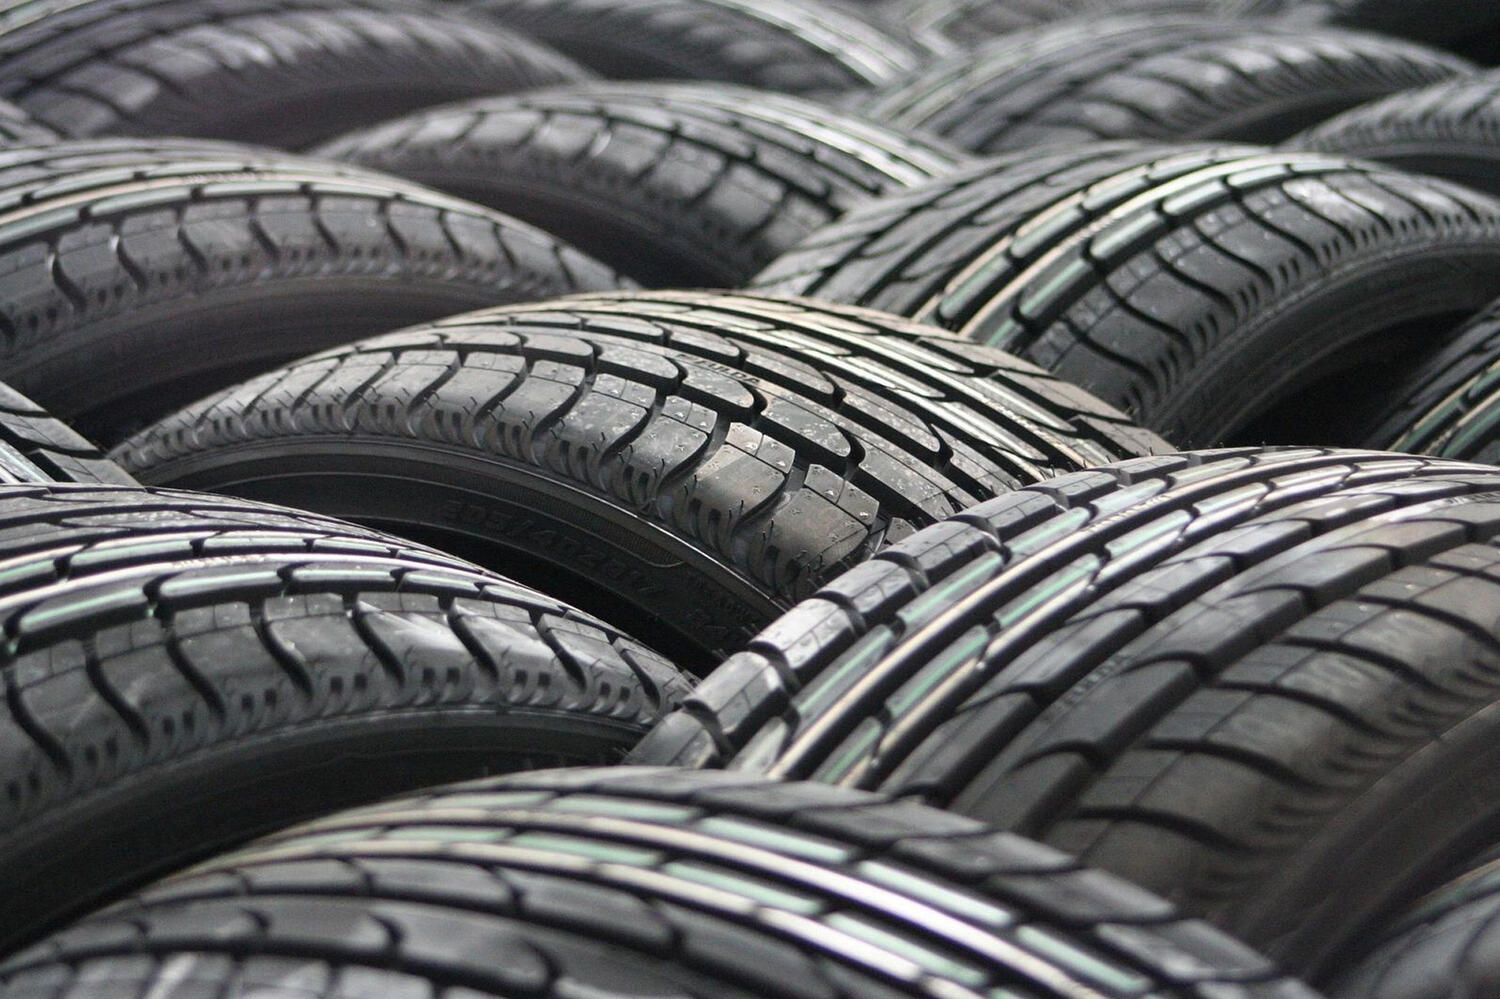 Tyres Business For Sale Web2 Kakapo Business Sales